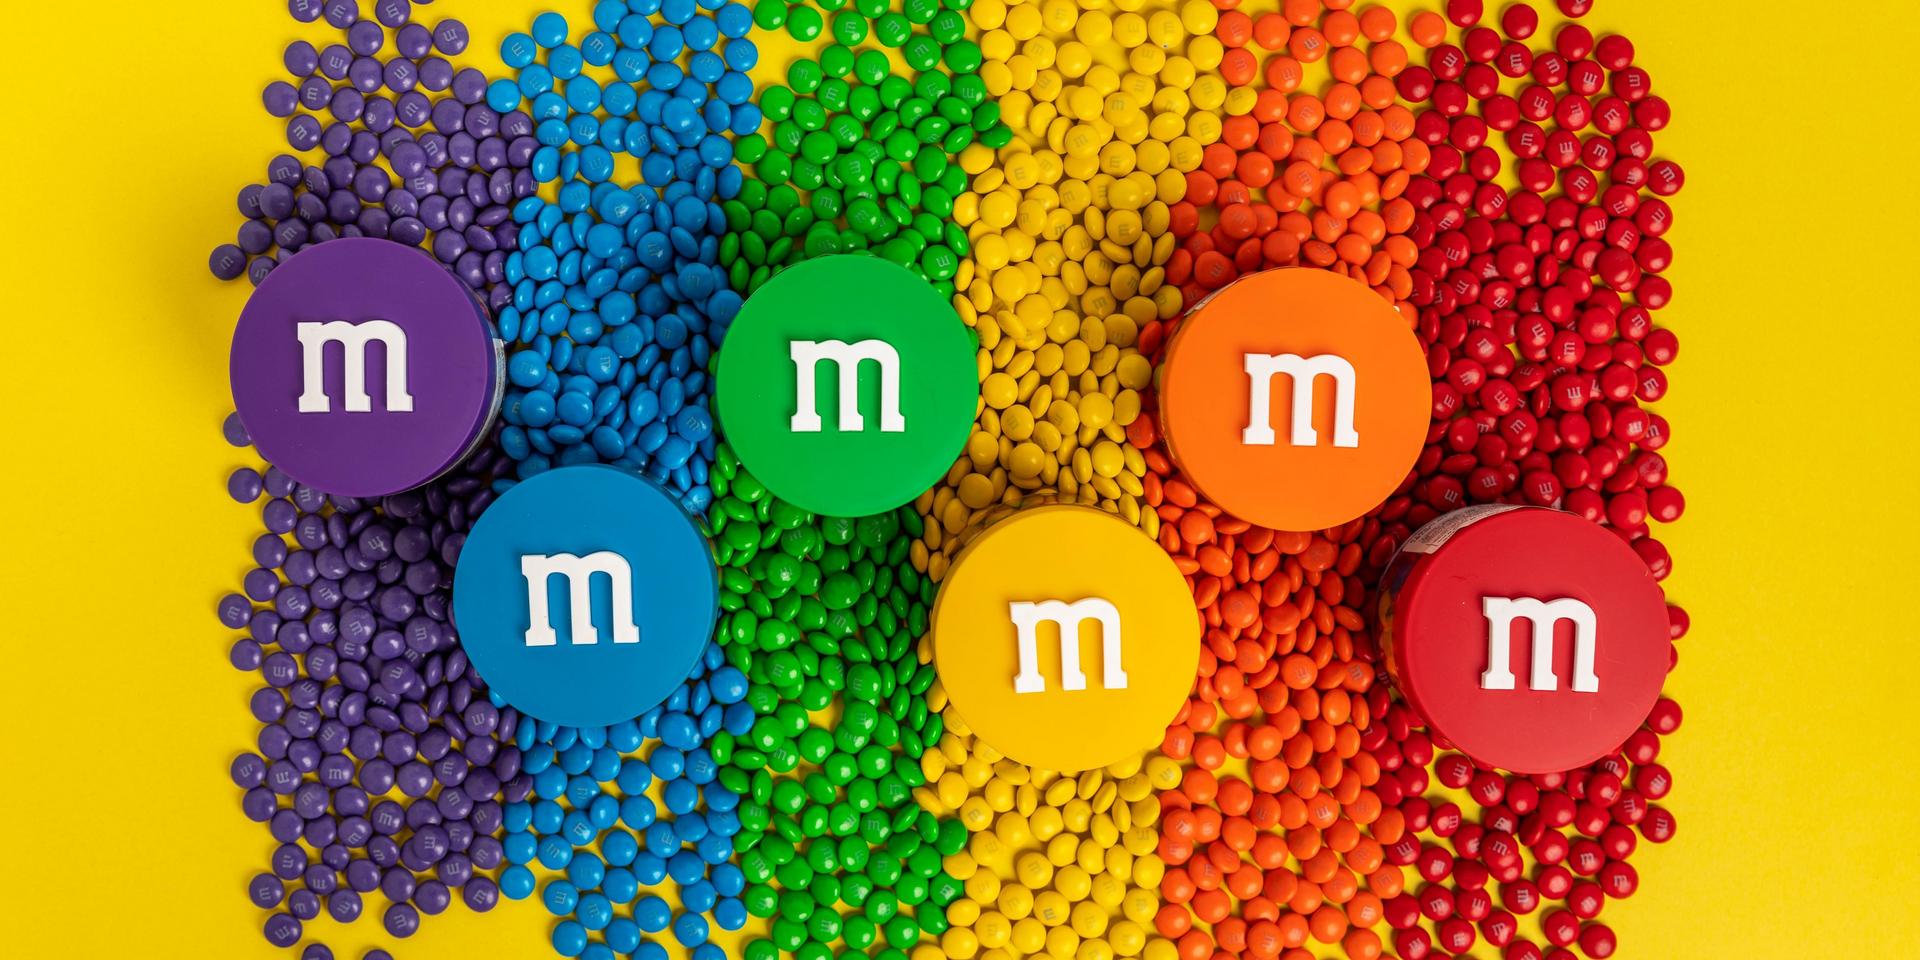 M&m's For All Funkind : Target